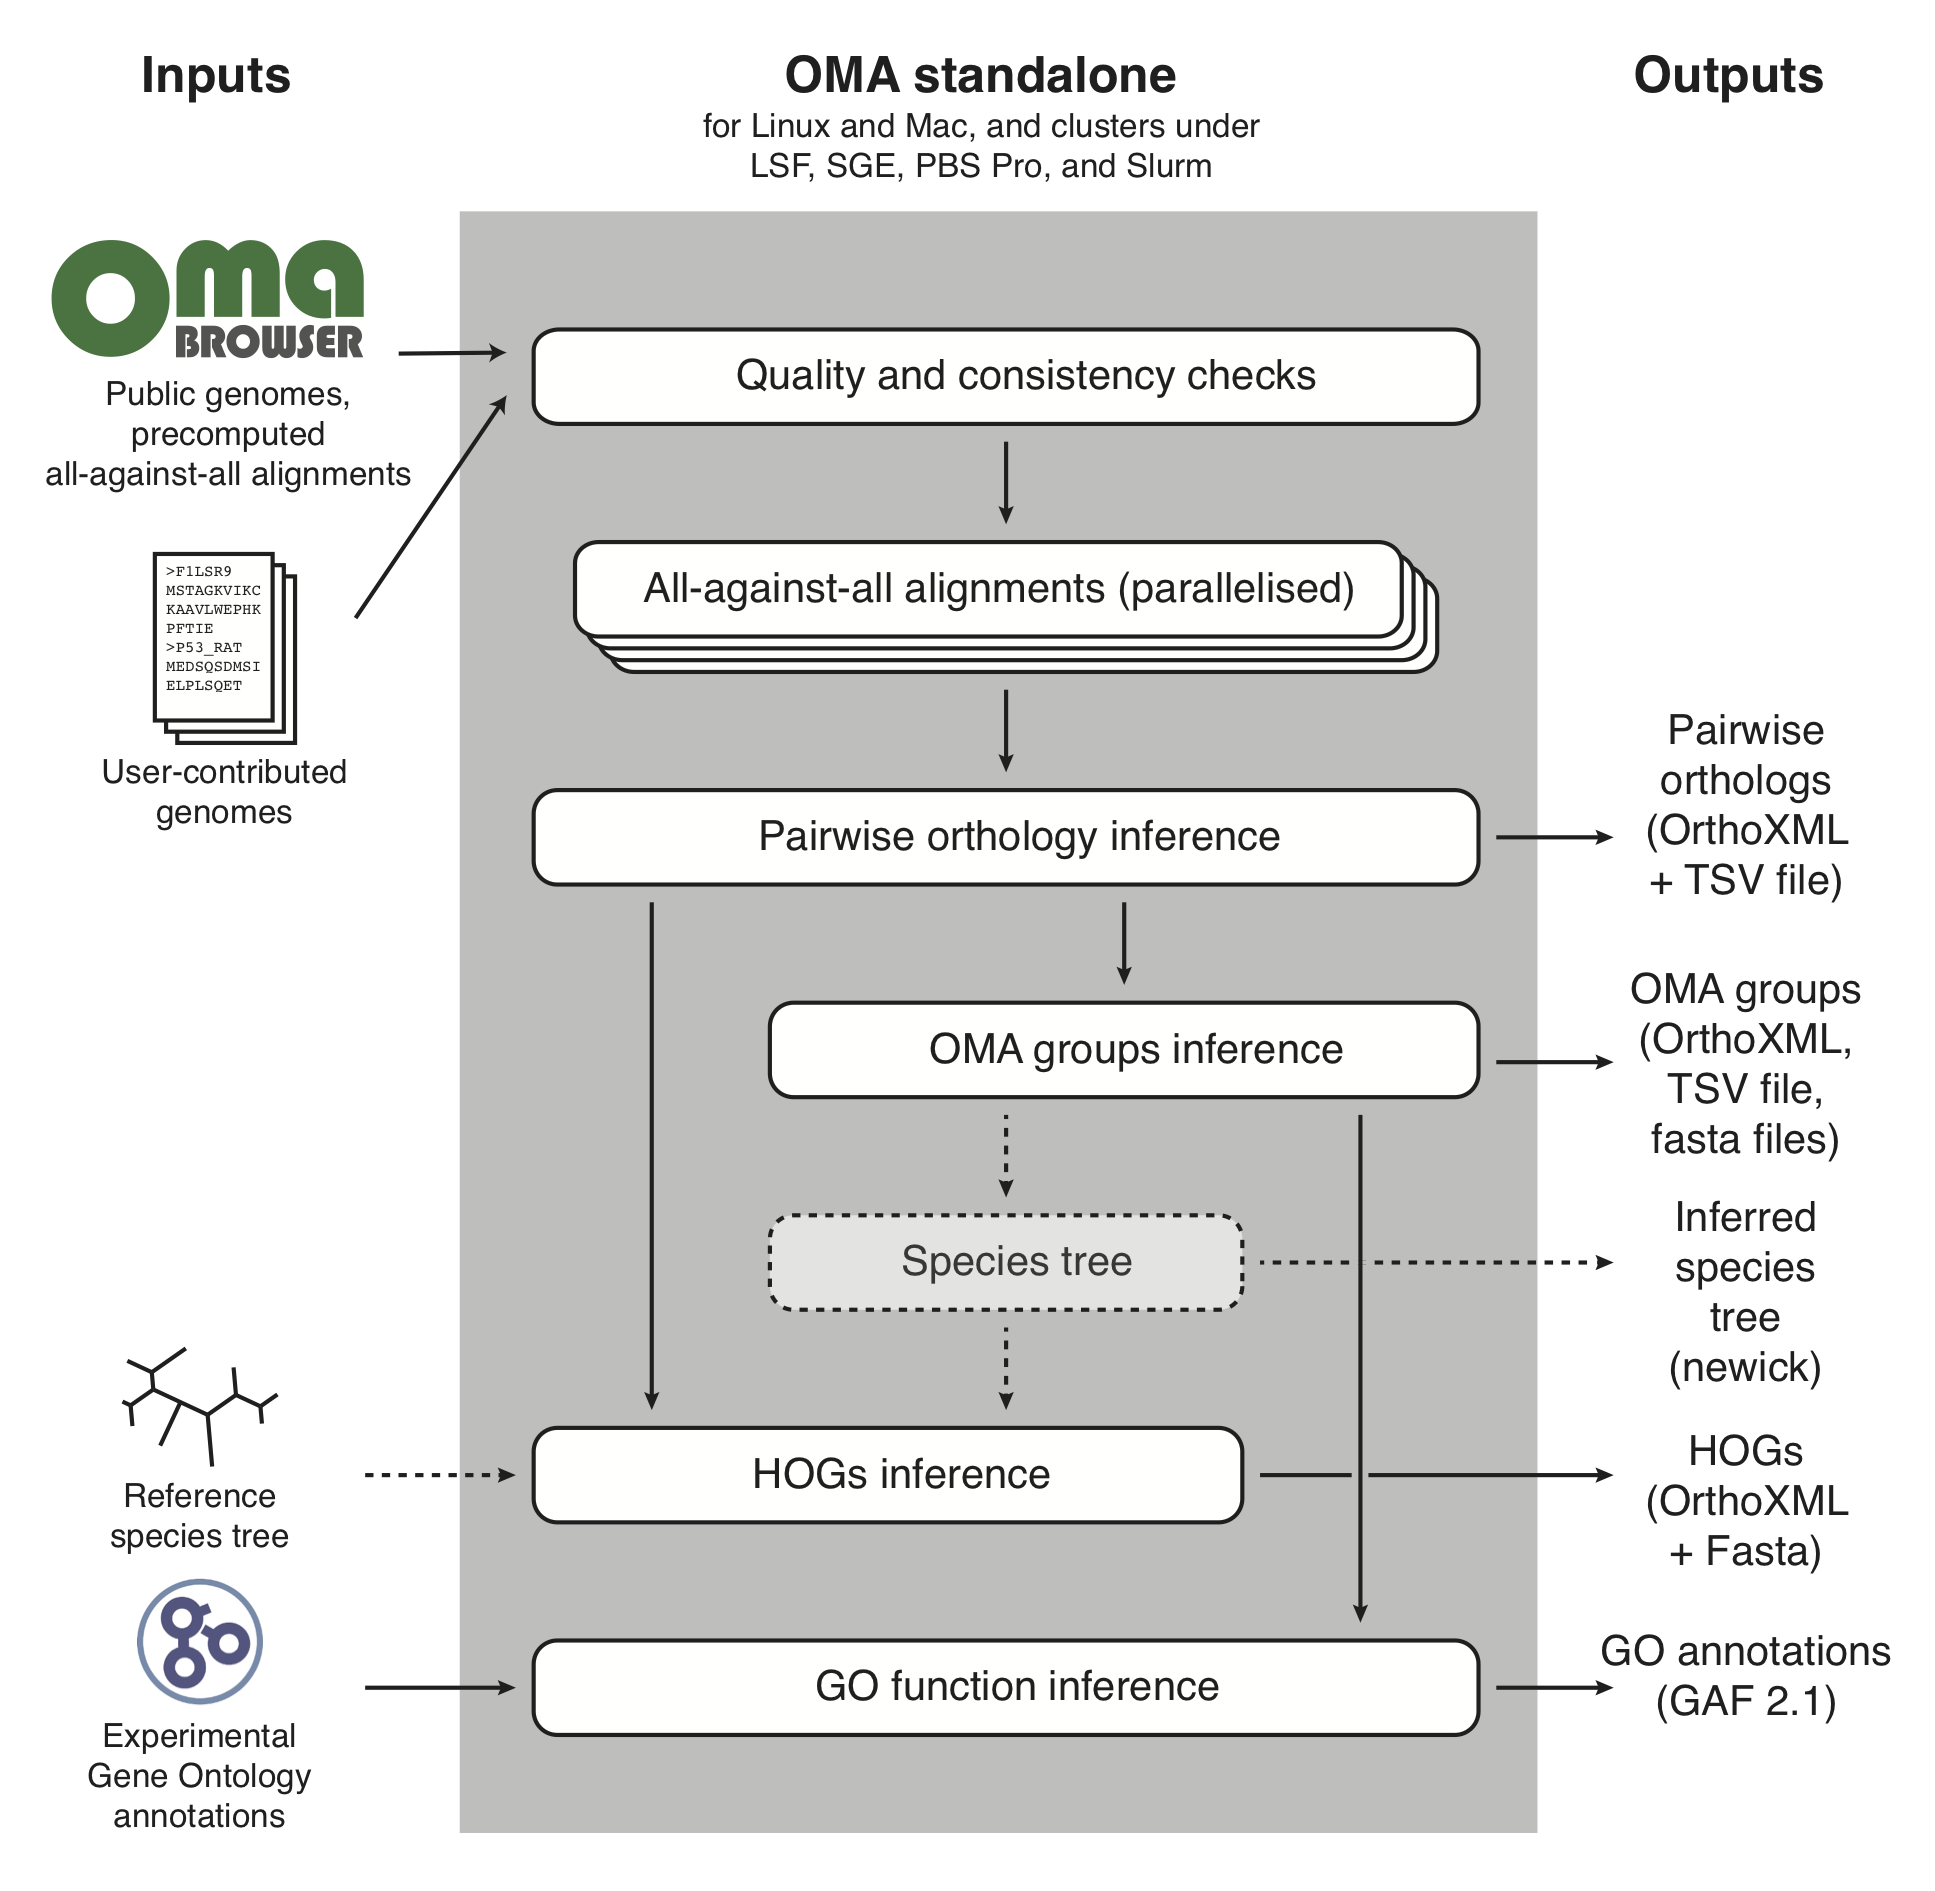 Figure 1: Conceptual 
                overview of the OMA standalone software. Dotted arrows indicate 
                alternative steps (reference species tree either specified as input 
                or inferred from the data).